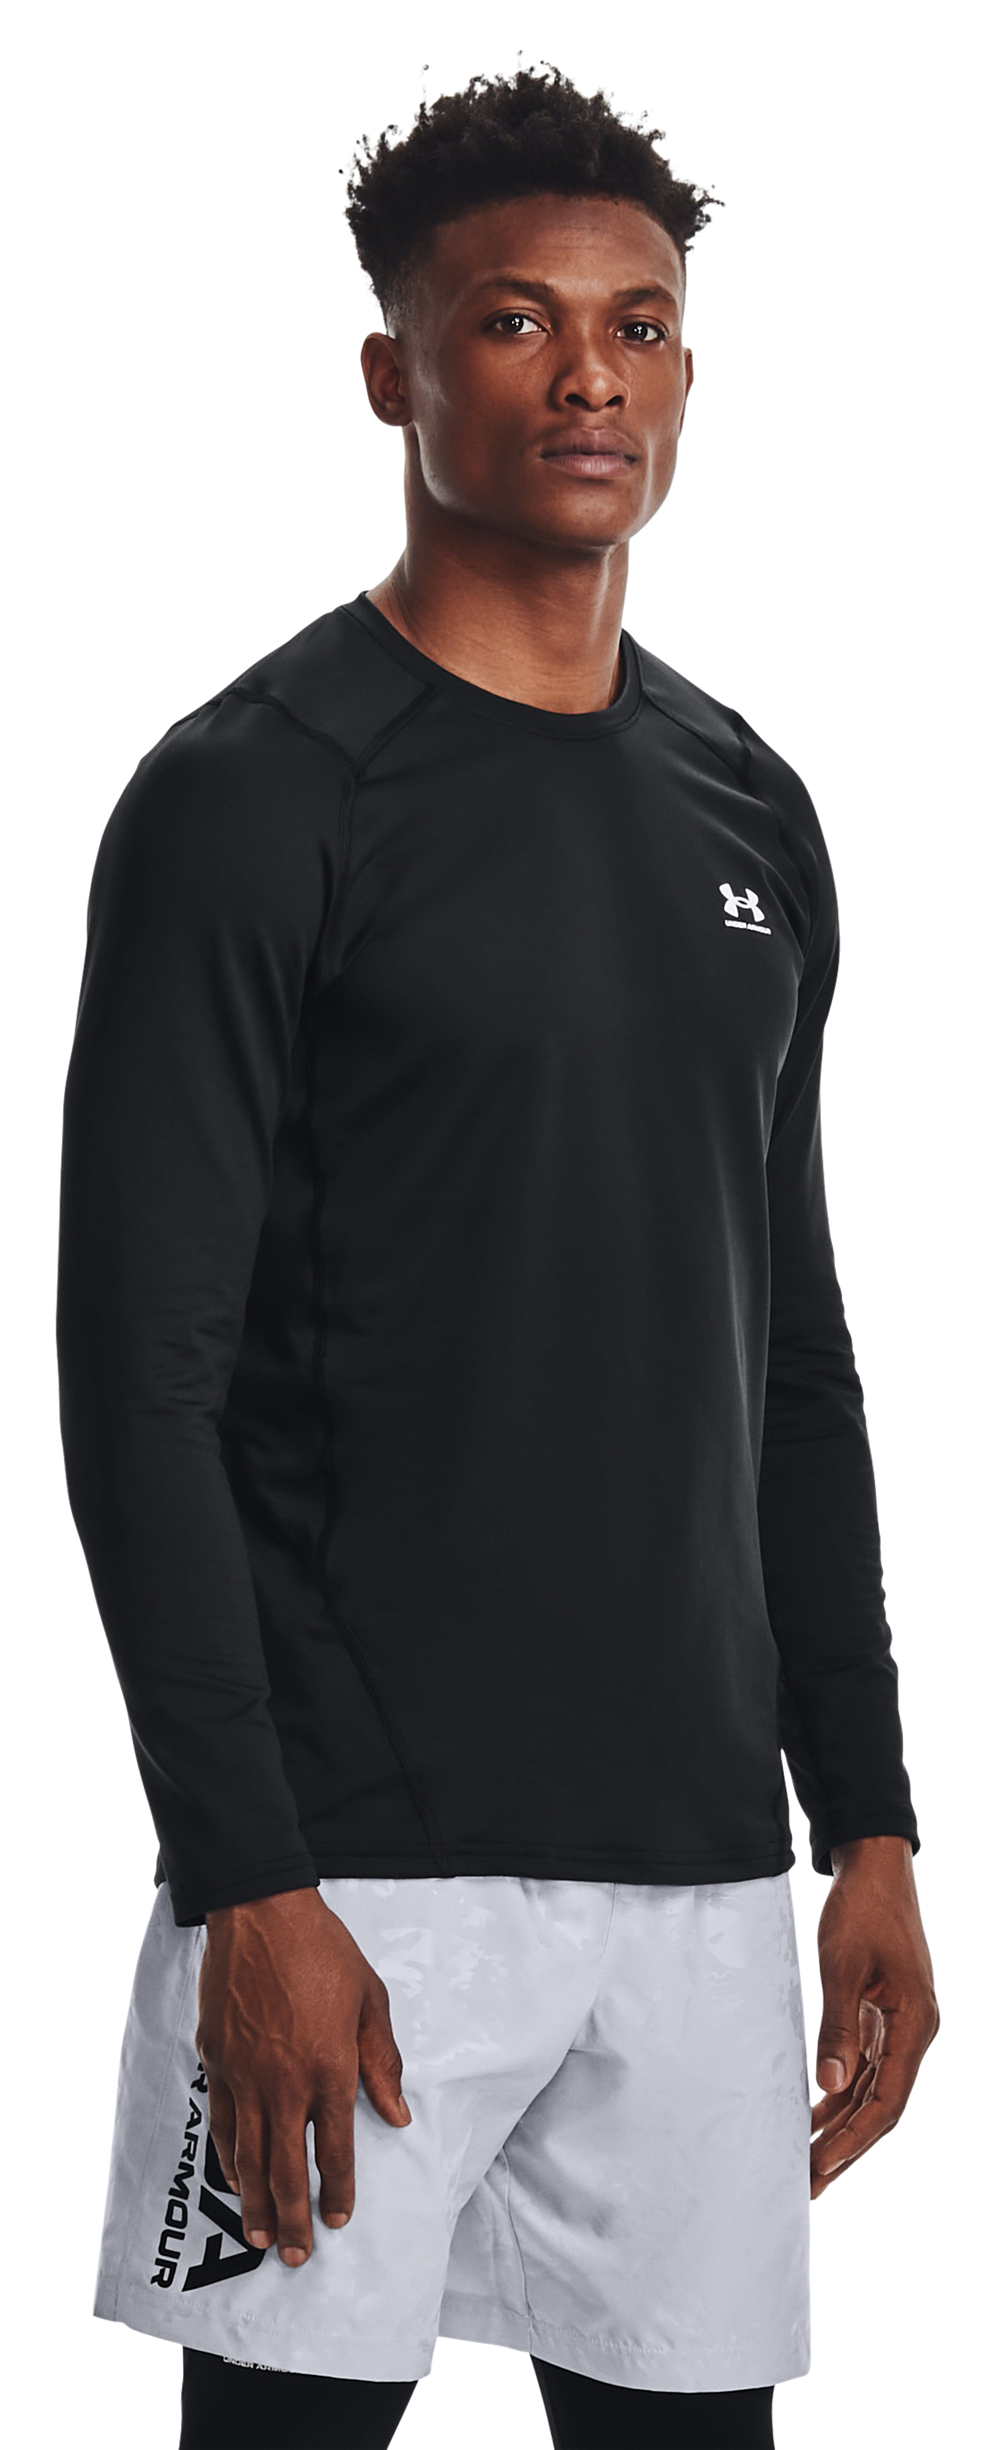 Under Armour ColdGear Fitted Long-Sleeve Crew for Men - Black/White - MT